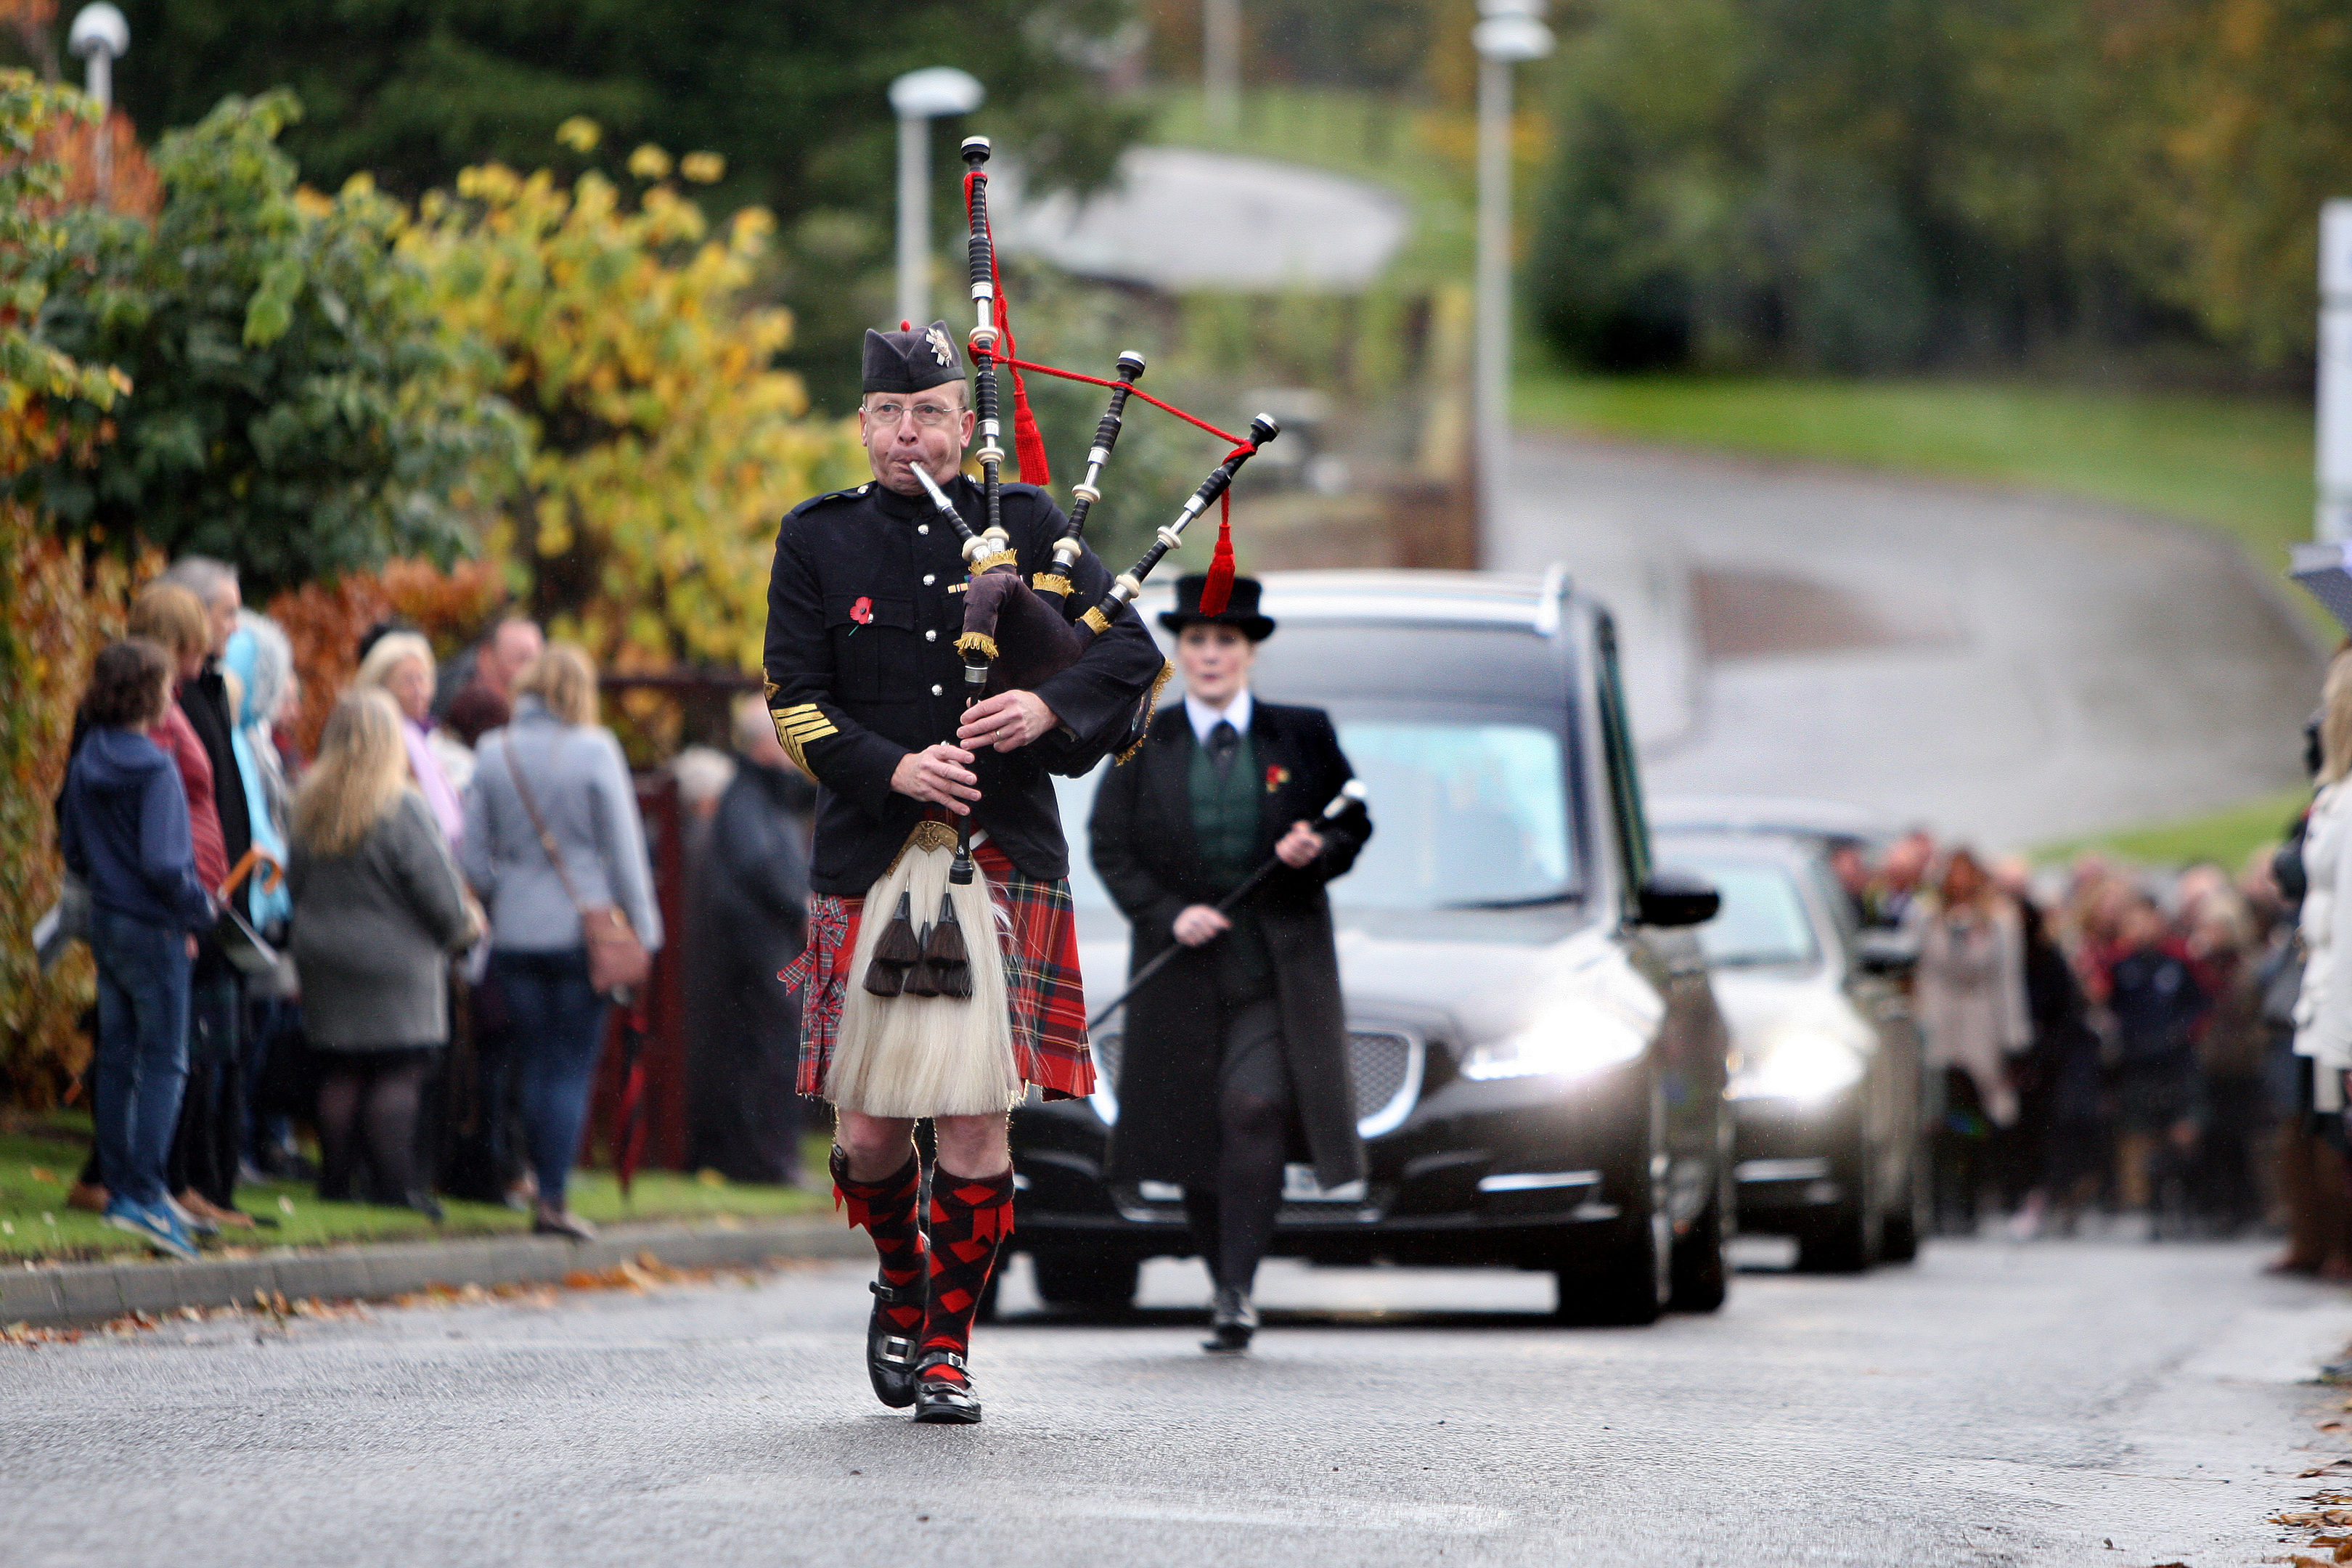 A piper leads the hearse carrying Ewen Chisholm and followed by hundreds of mourners on way to Kirriemuir cemetery,